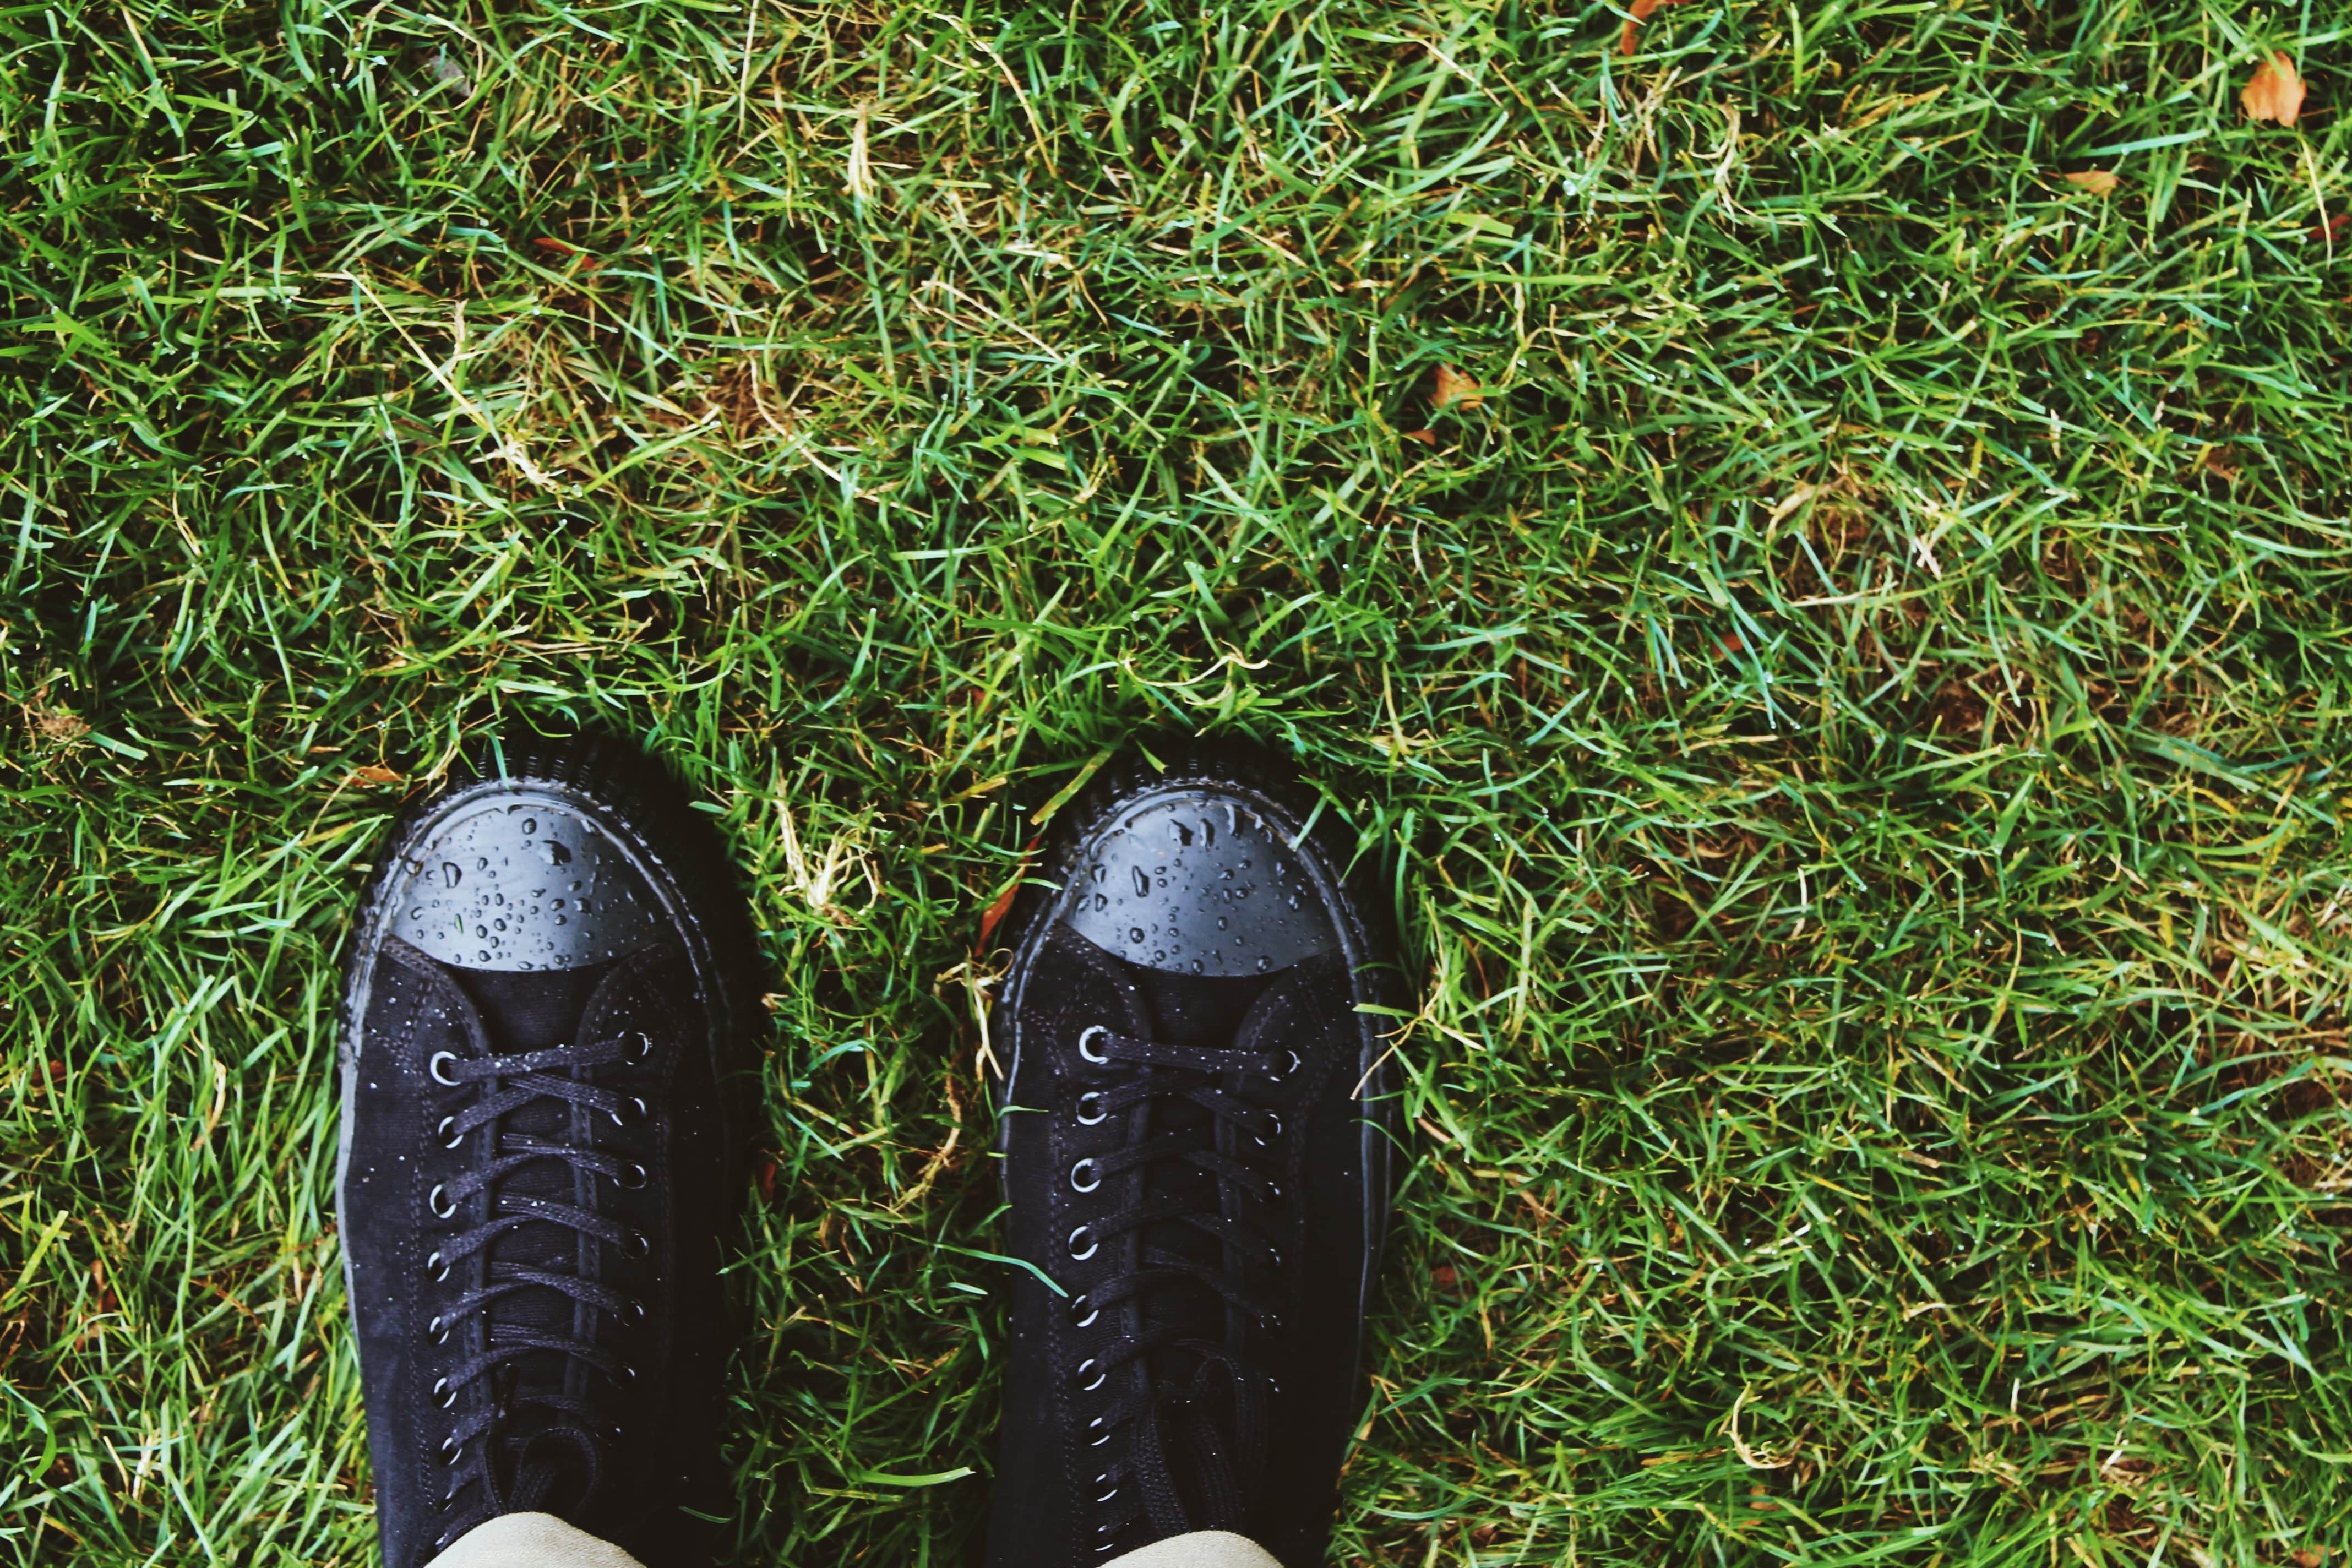 pair of black shoes on a grass lawn